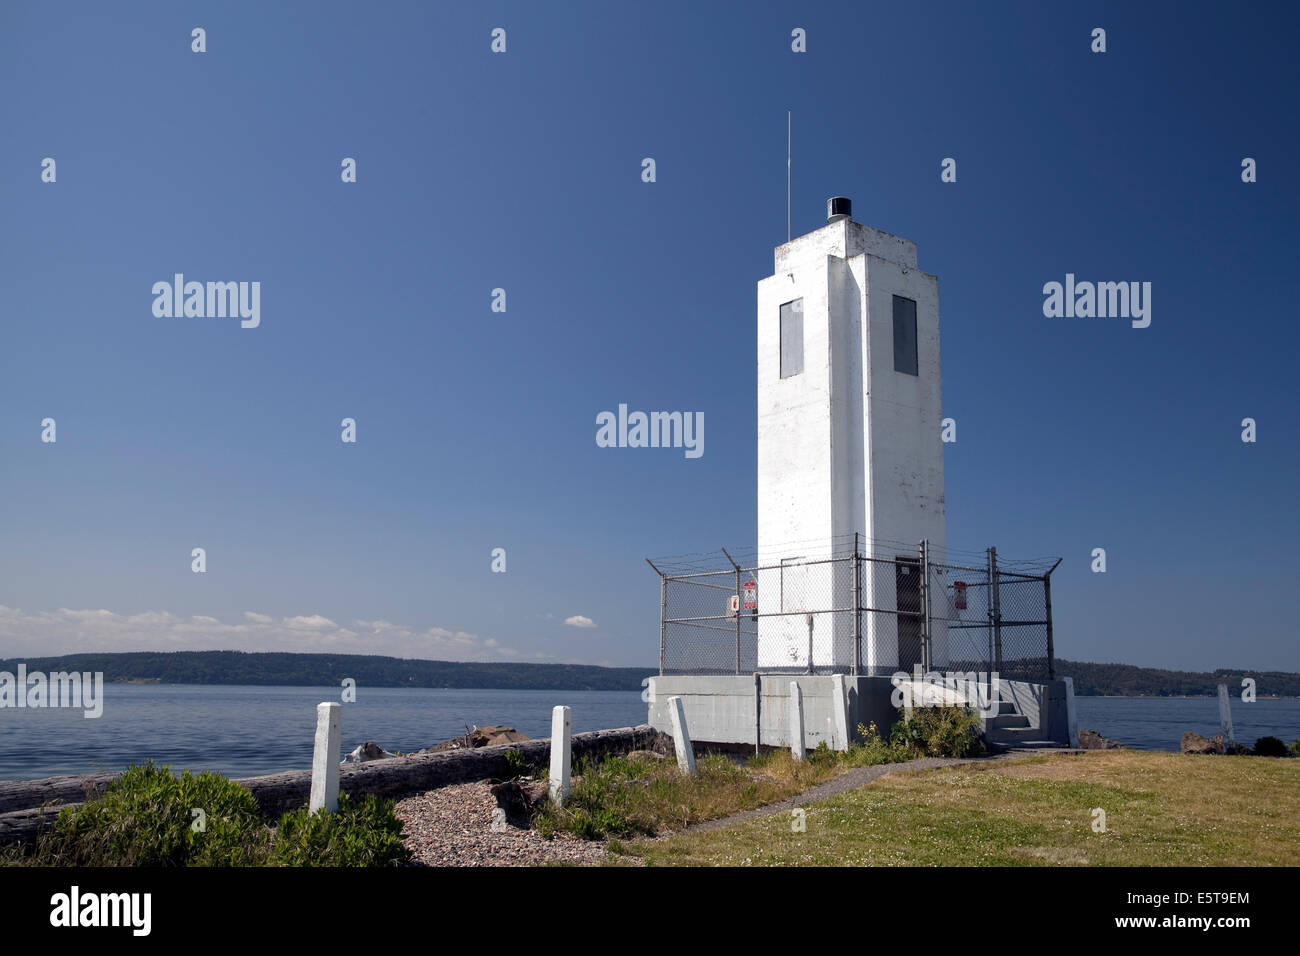 Browns Point Lighthouse sits on the eastern side of the entrance to Commencement Bay near Tacoma, WA, USA. Stock Photo